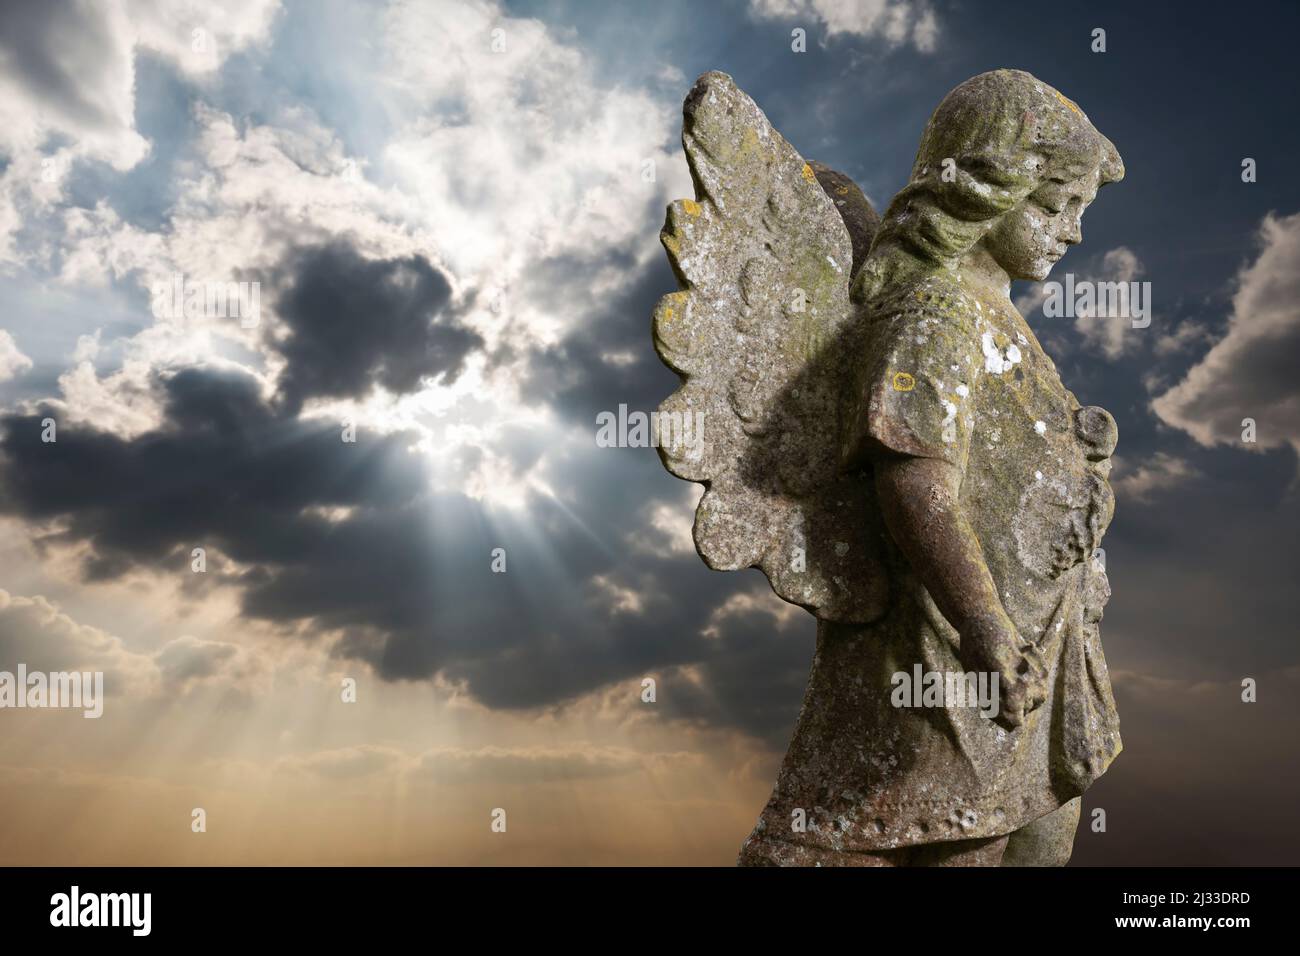 Stone statue of winged angel against rays of sunlight behind clouds Stock Photo